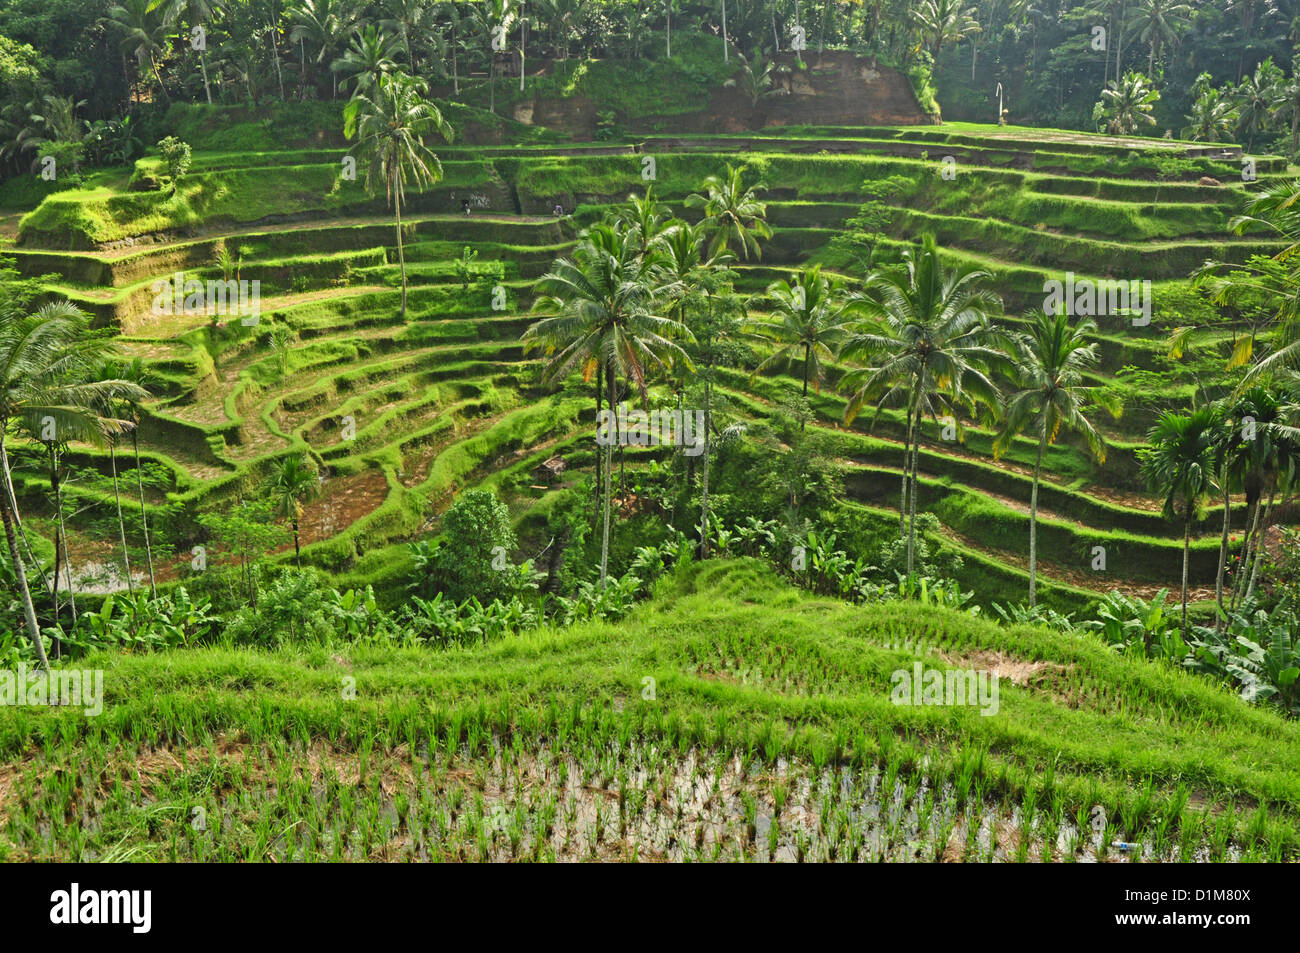 INDONESIA, Bali, Tegallalang, typical rice terrace landscape with palm trees Stock Photo